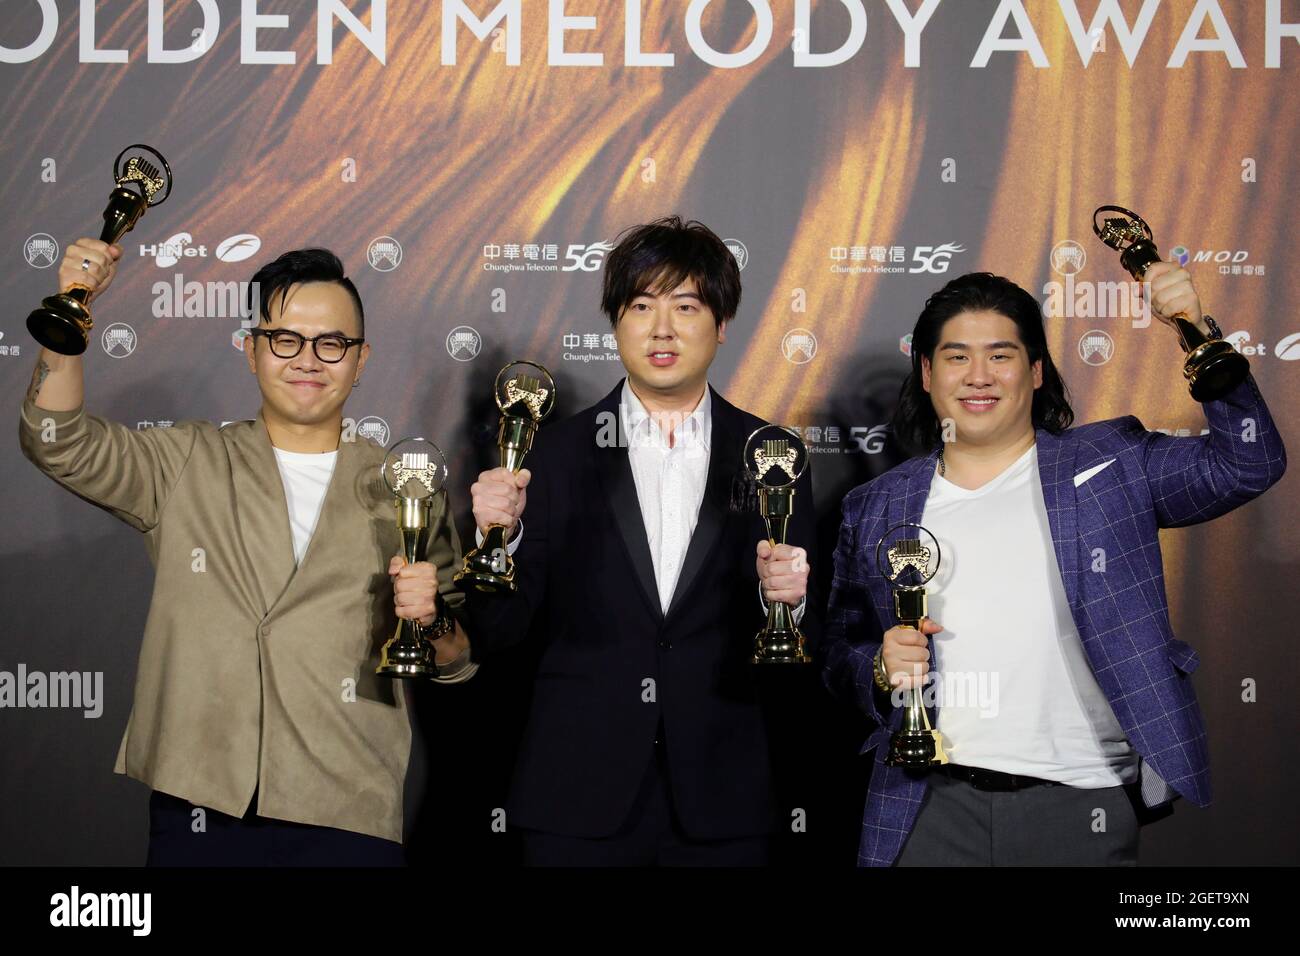 Members of The Spice Cabinet band pose with their Best Instrumental Album and Best Instrumental Composer awards at the 32nd Golden Melody Awards in Taipei, Taiwan August 21, 2021. REUTERS/I-Hwa Cheng Stock Photo